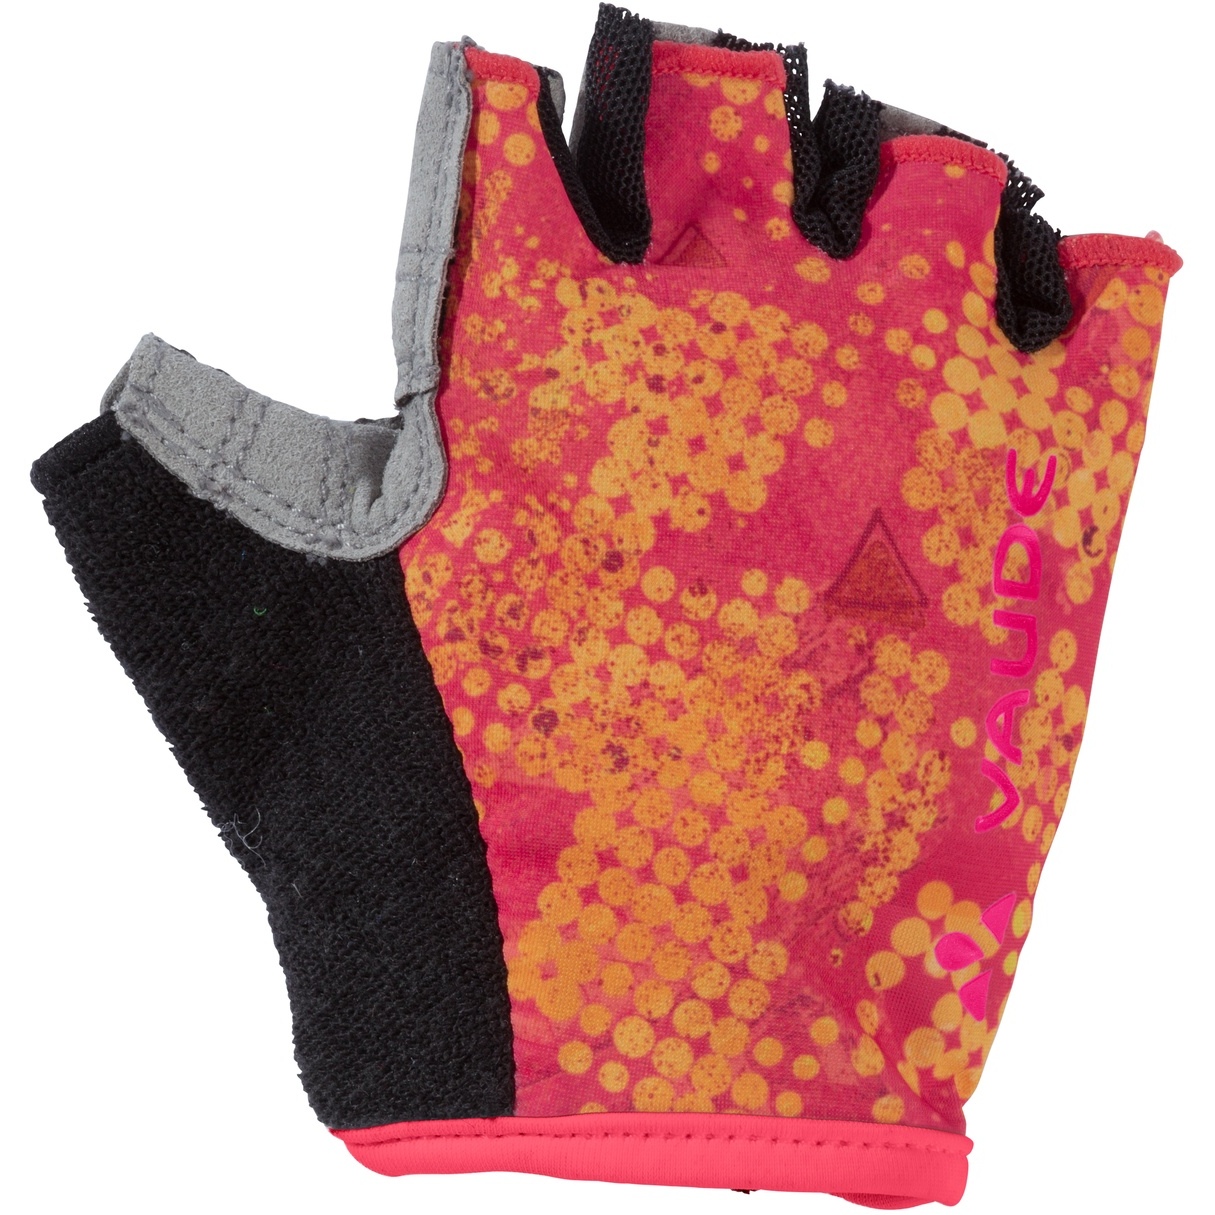 Picture of Vaude Kids Grody Gloves - bright pink